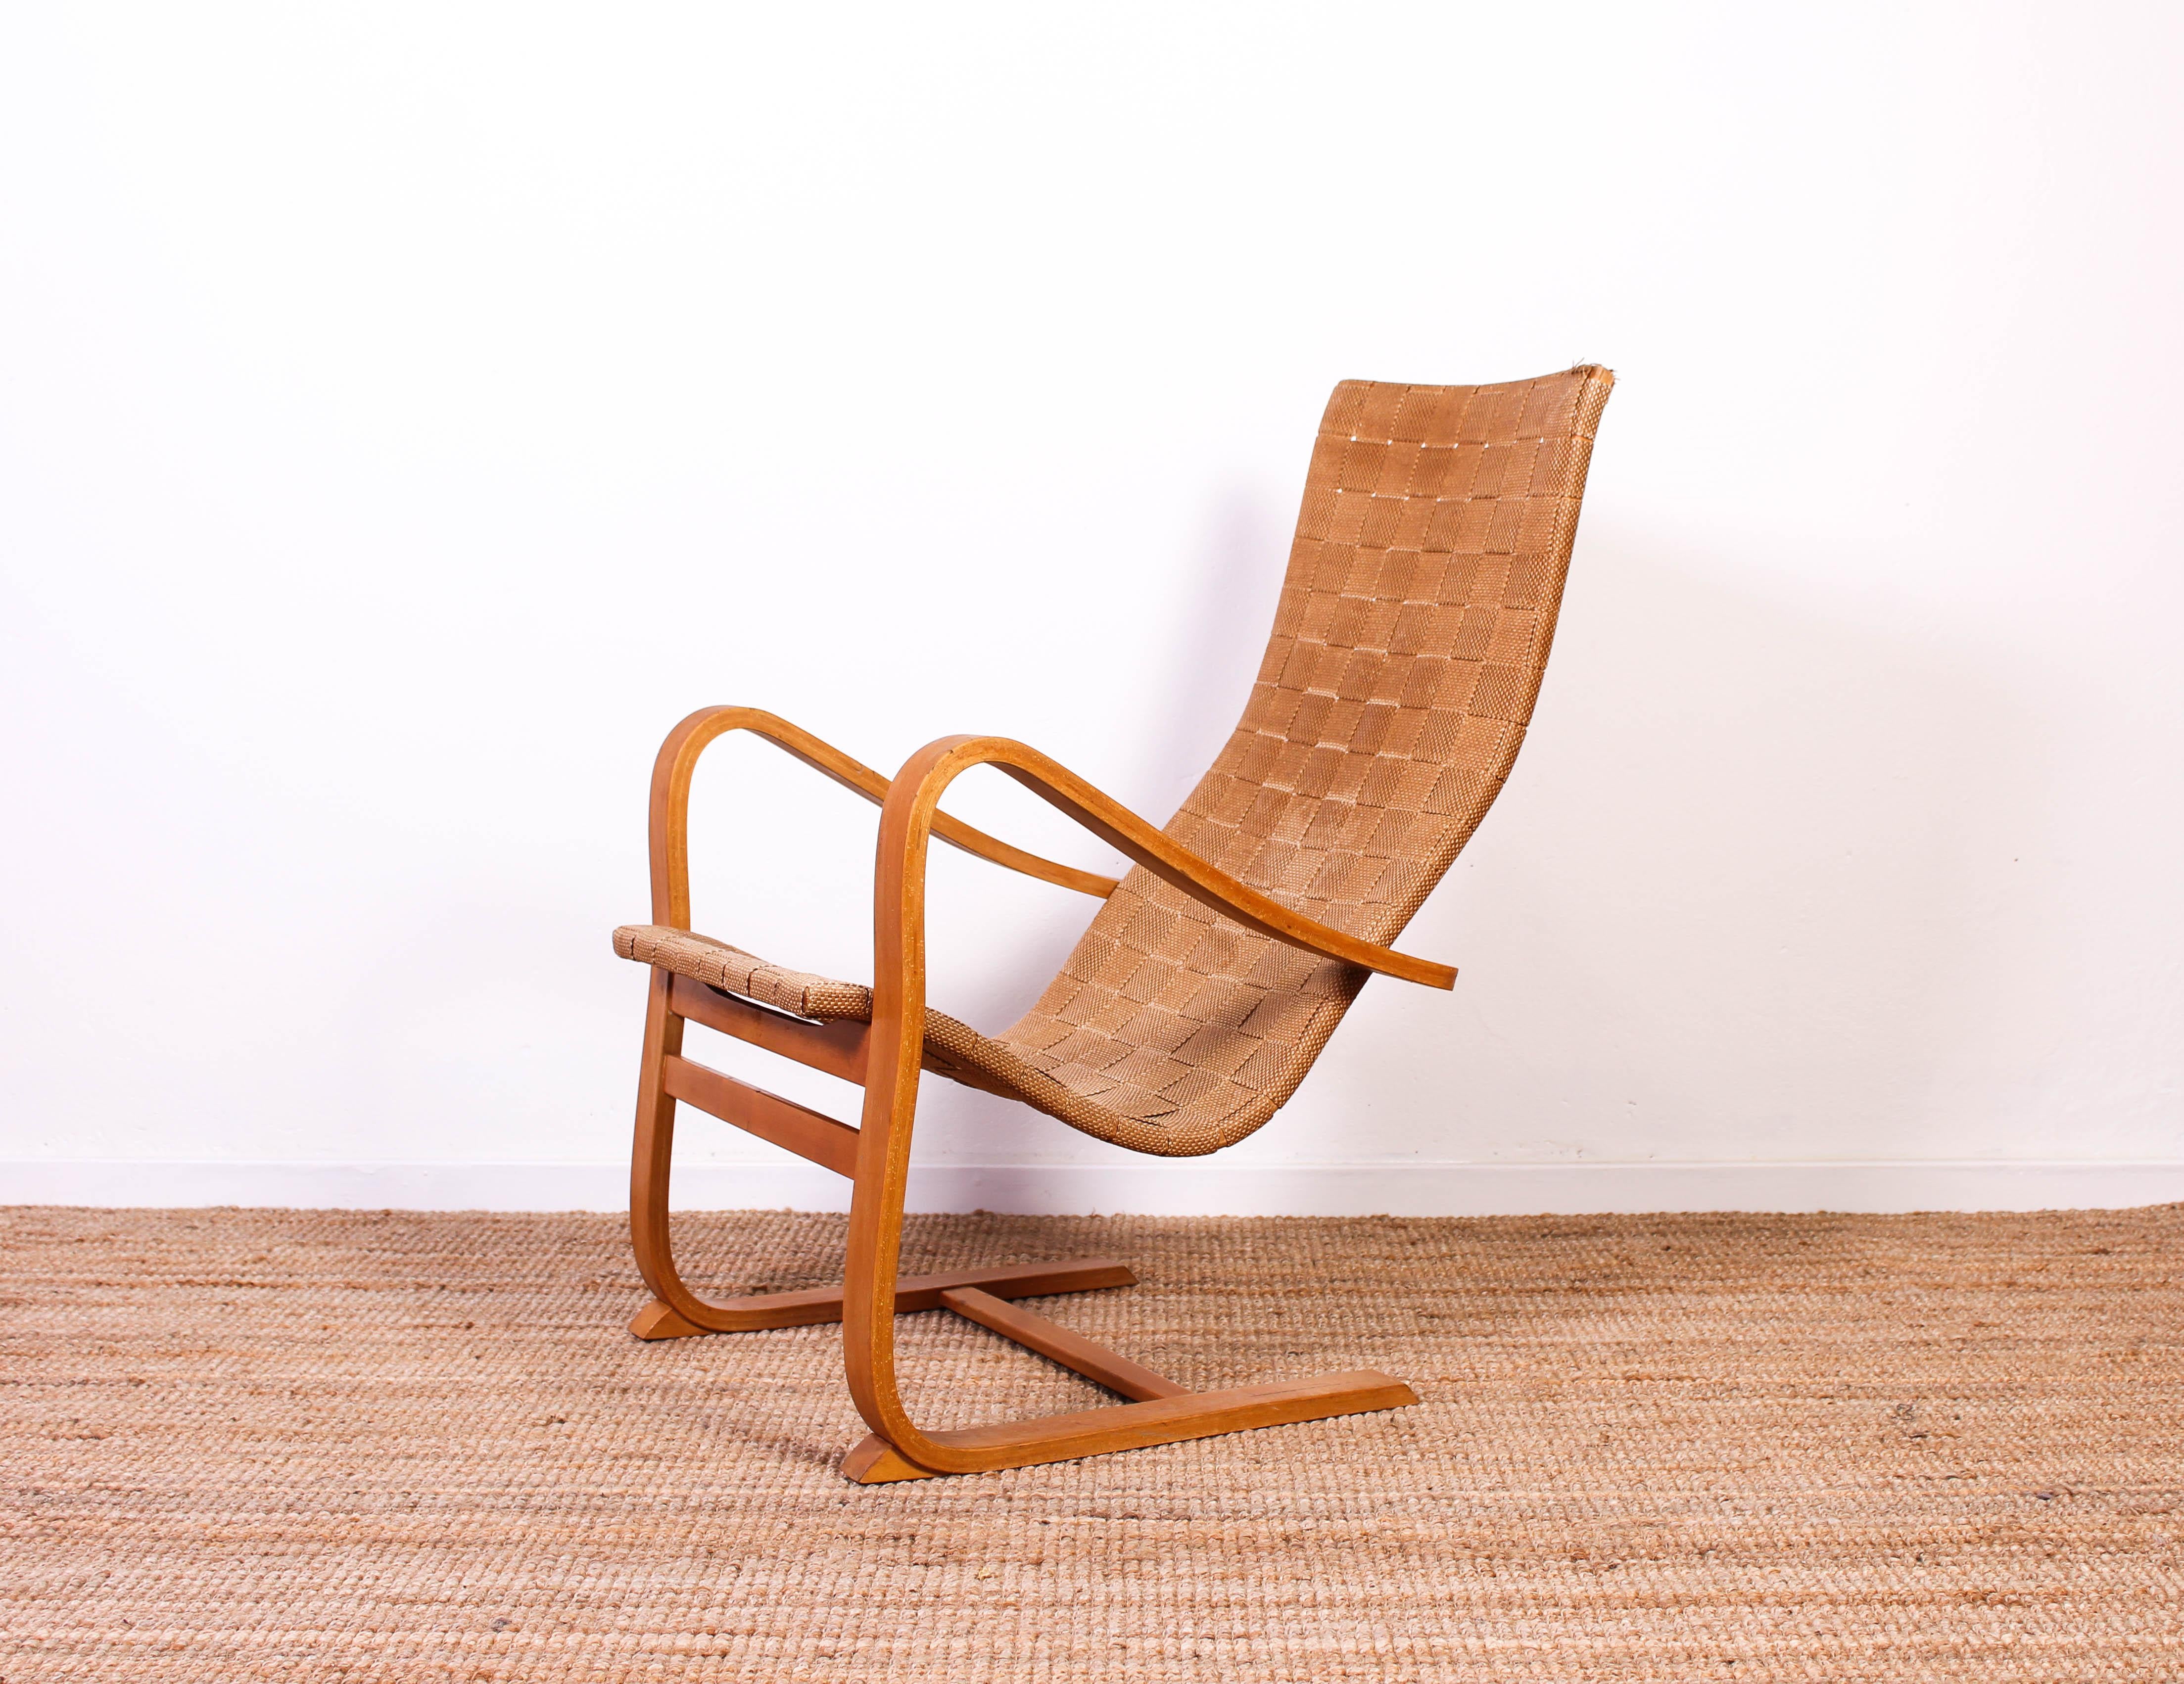 Midcentury lounge chair by Swedish designer Gustaf Axel Berg. The chair was designed and produced in the 1940s and still has its original upholstery.

The chair has heavy signs of usage and patina on frame and canvas. There are no structural